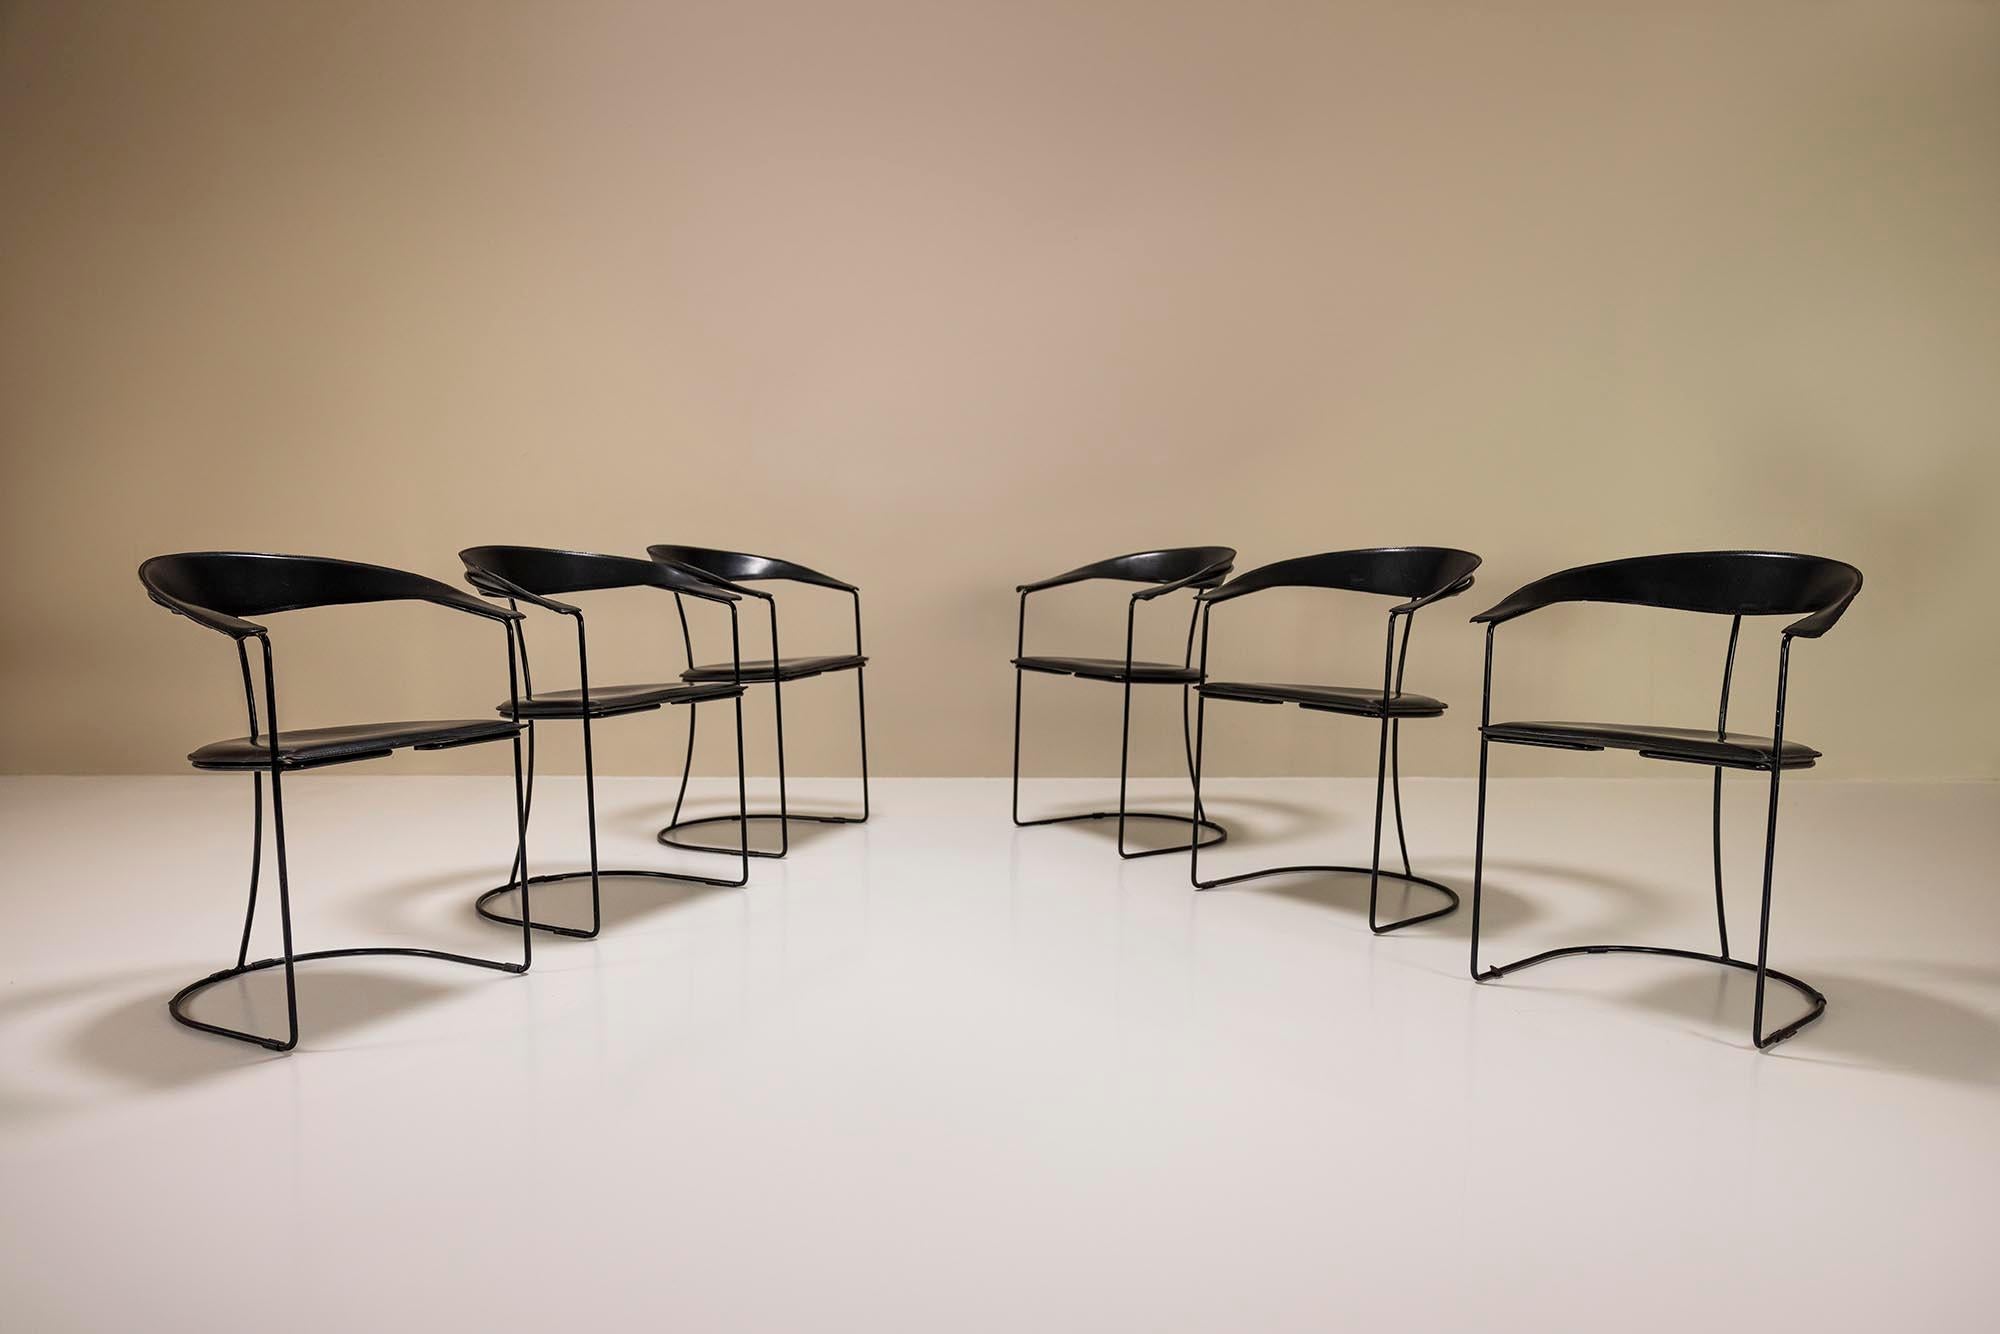 This ‘airy’ set is a perfect example of post-modernistic design. Made by the Italian family company Arrben in the 1980s, who mainly focused on leather furniture products. 

Design
As stated - the chairs have a very light look to it, given the thin